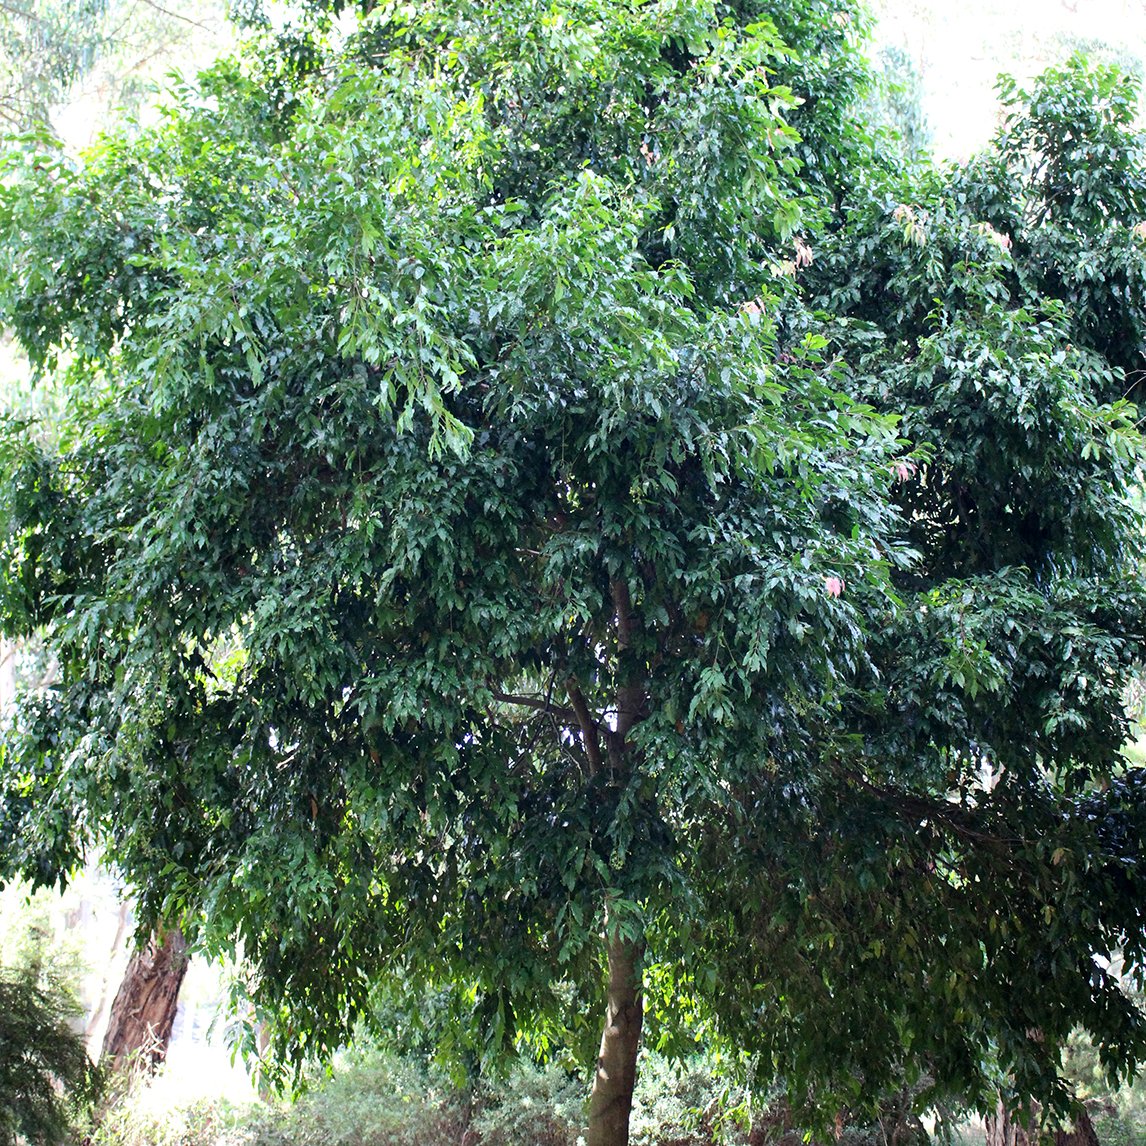 Image of Lilly pilly trees with vines